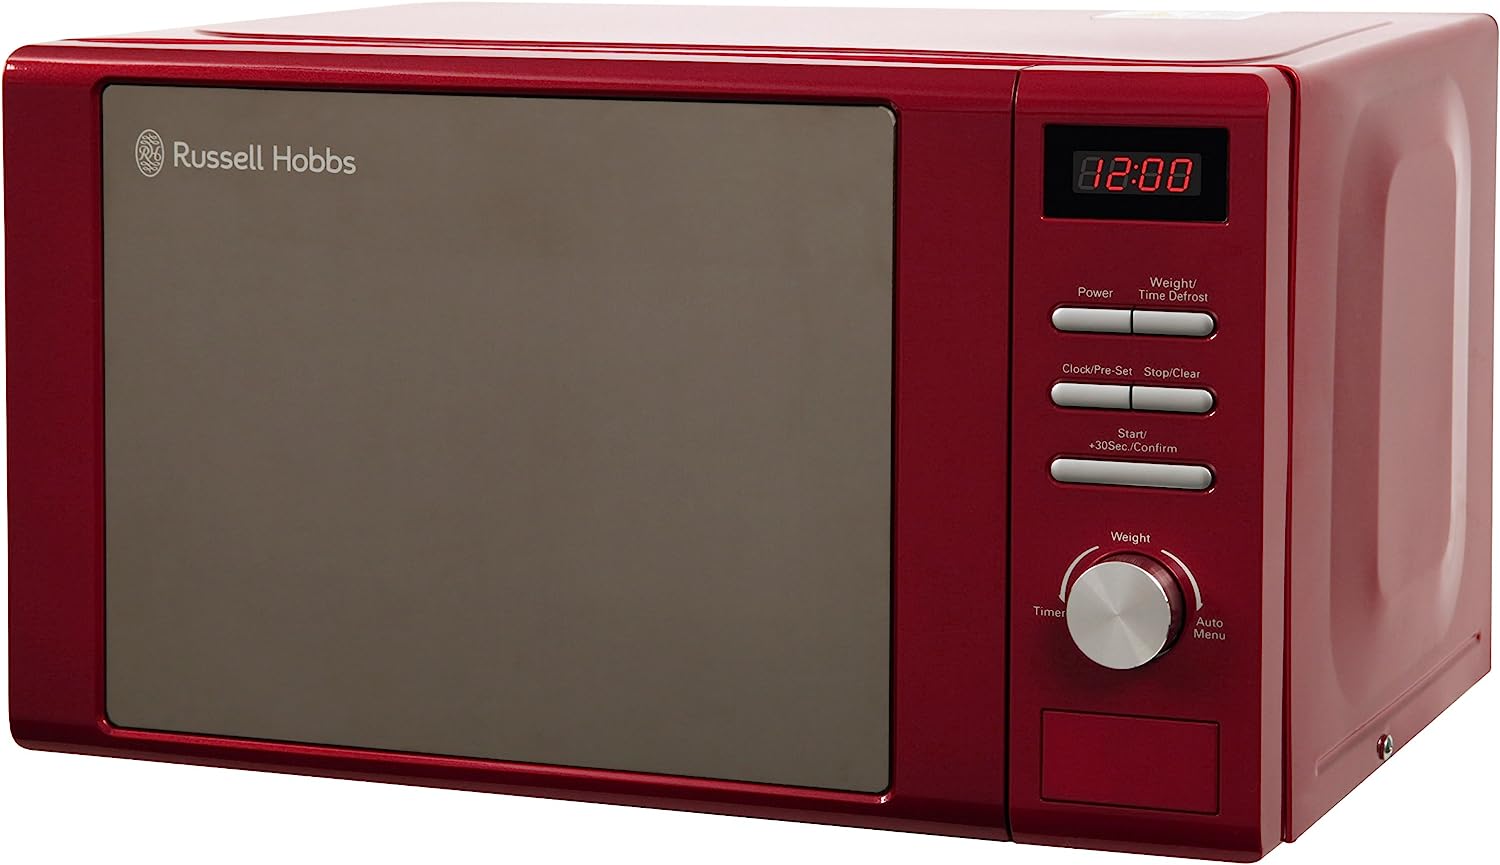 Russell Hobbs RHM2064R Digital Heritage Microwave with 5 Power Levels Auto And Weighted Defrost Settings 800W Red